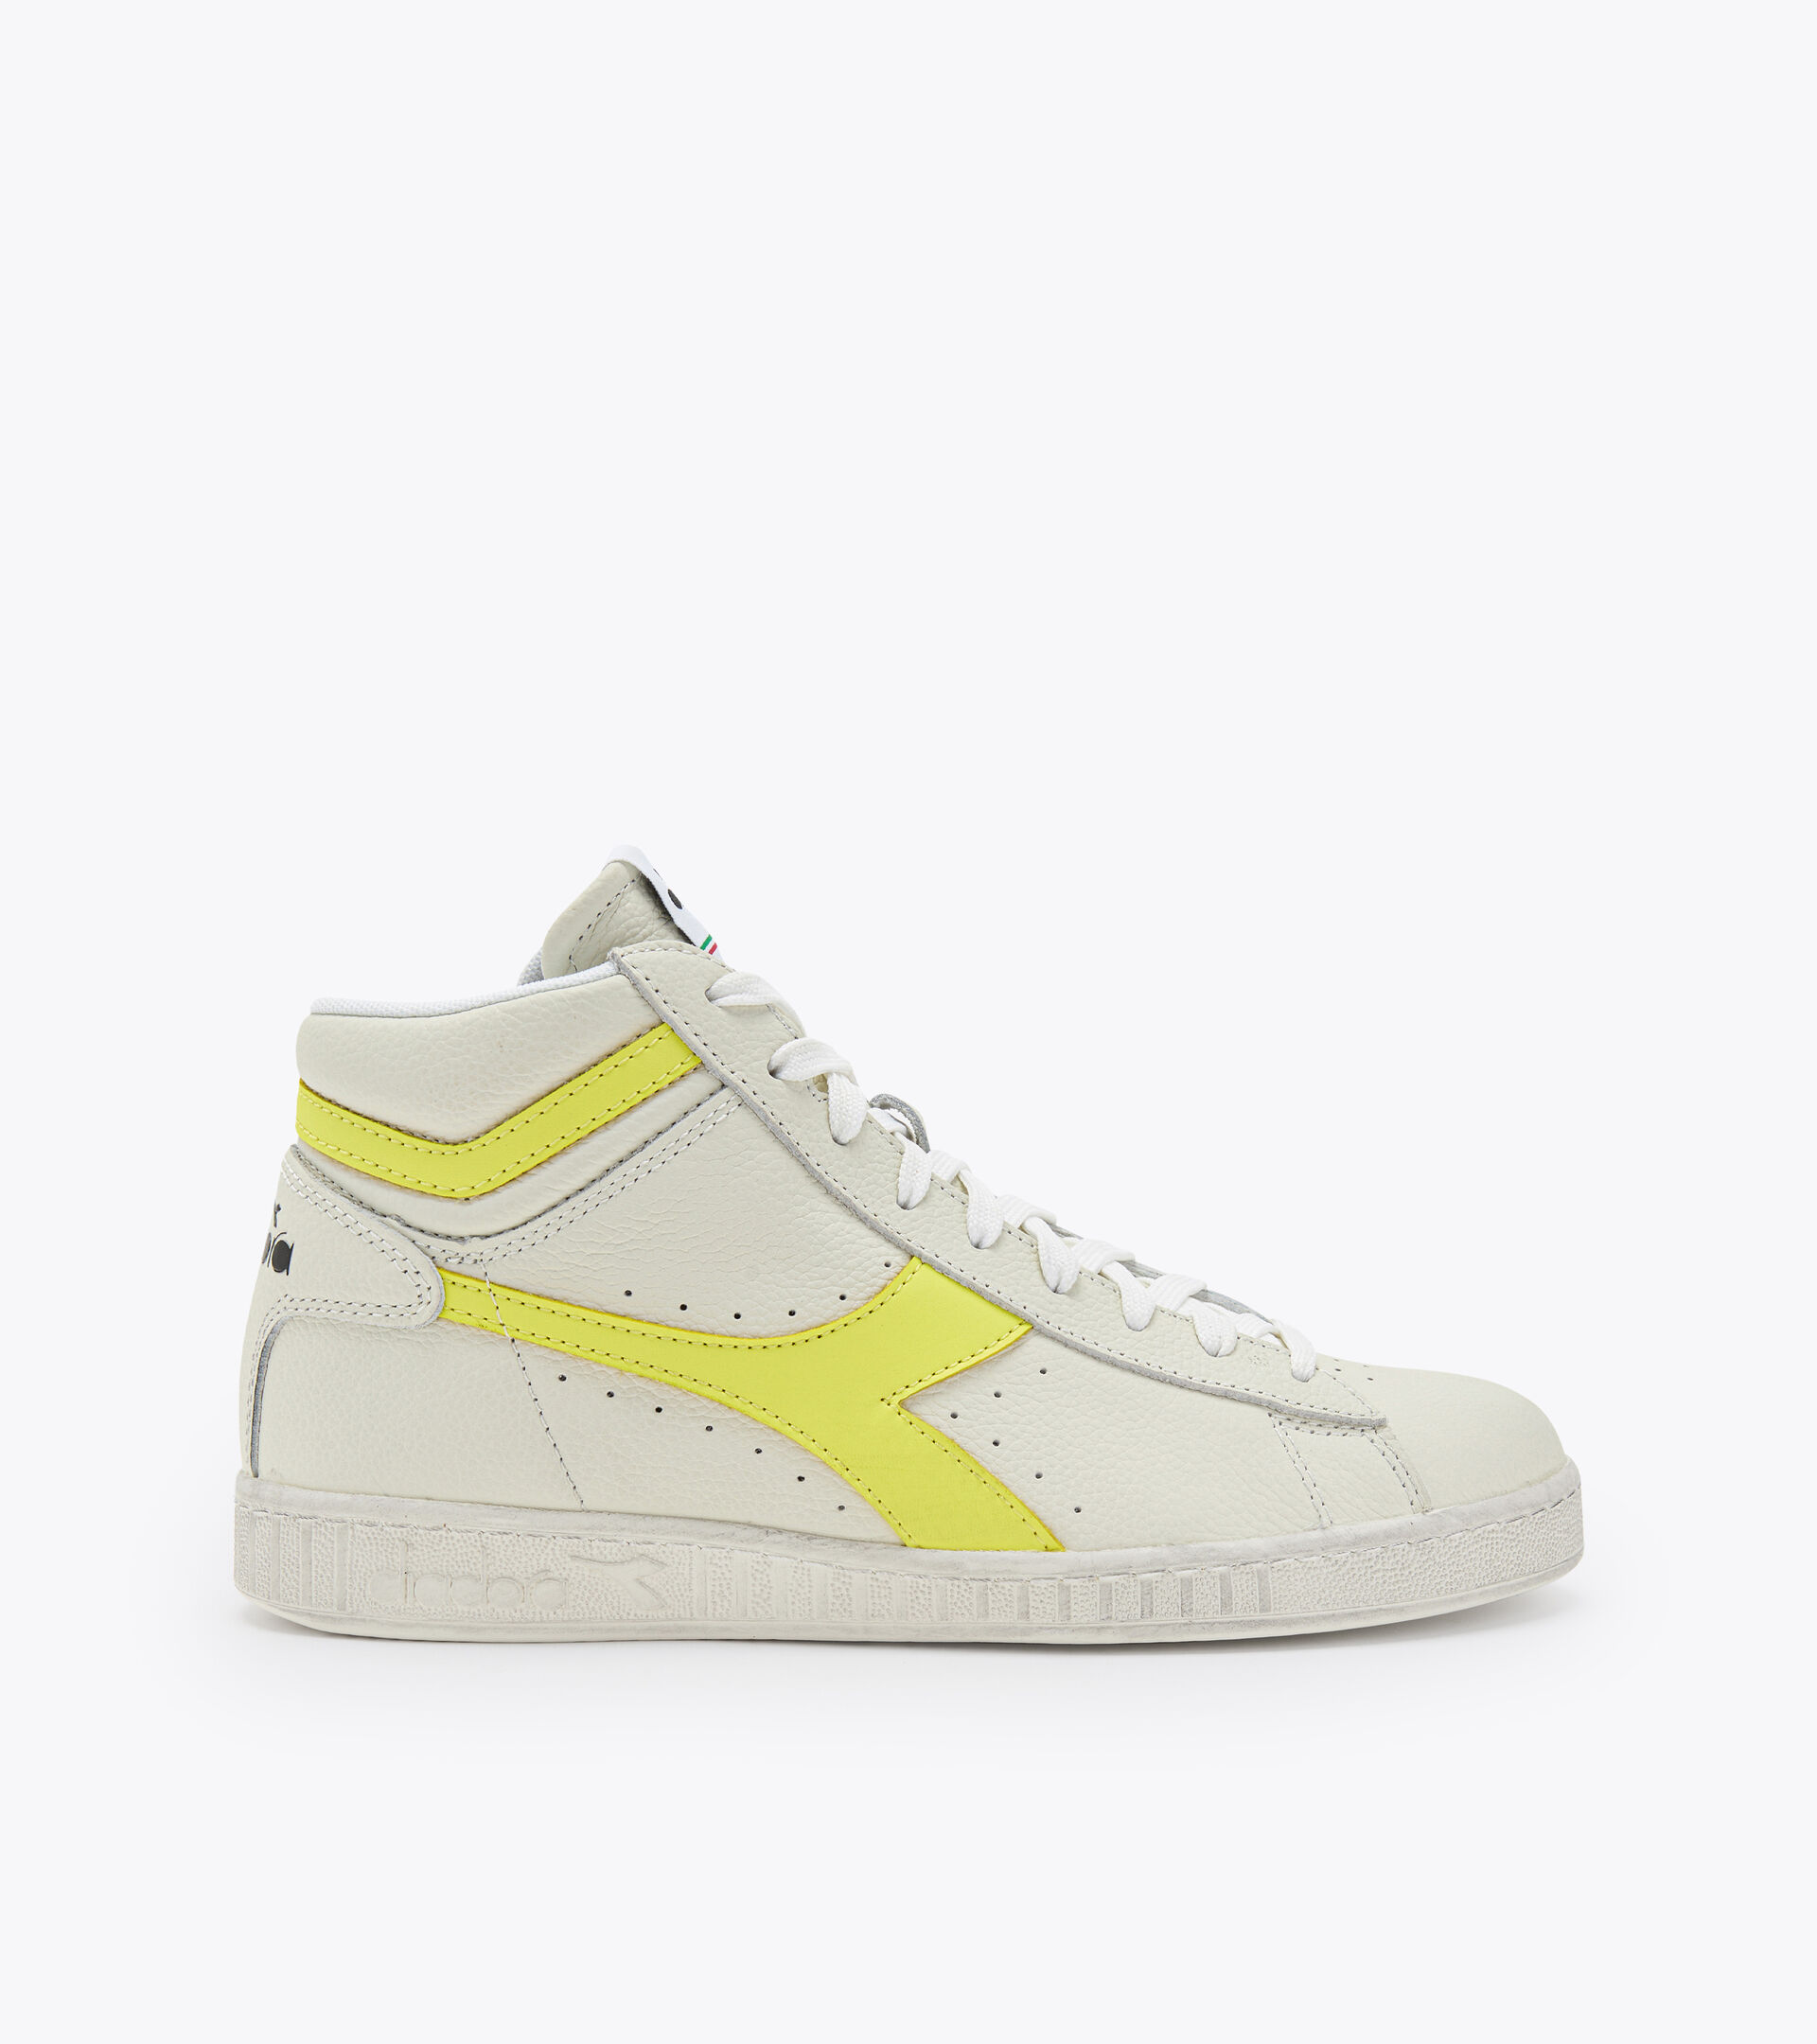 Stoffig G Leninisme GAME L HIGH FLUO WAXED Sporty sneakers - Unisex - Diadora Online Store US